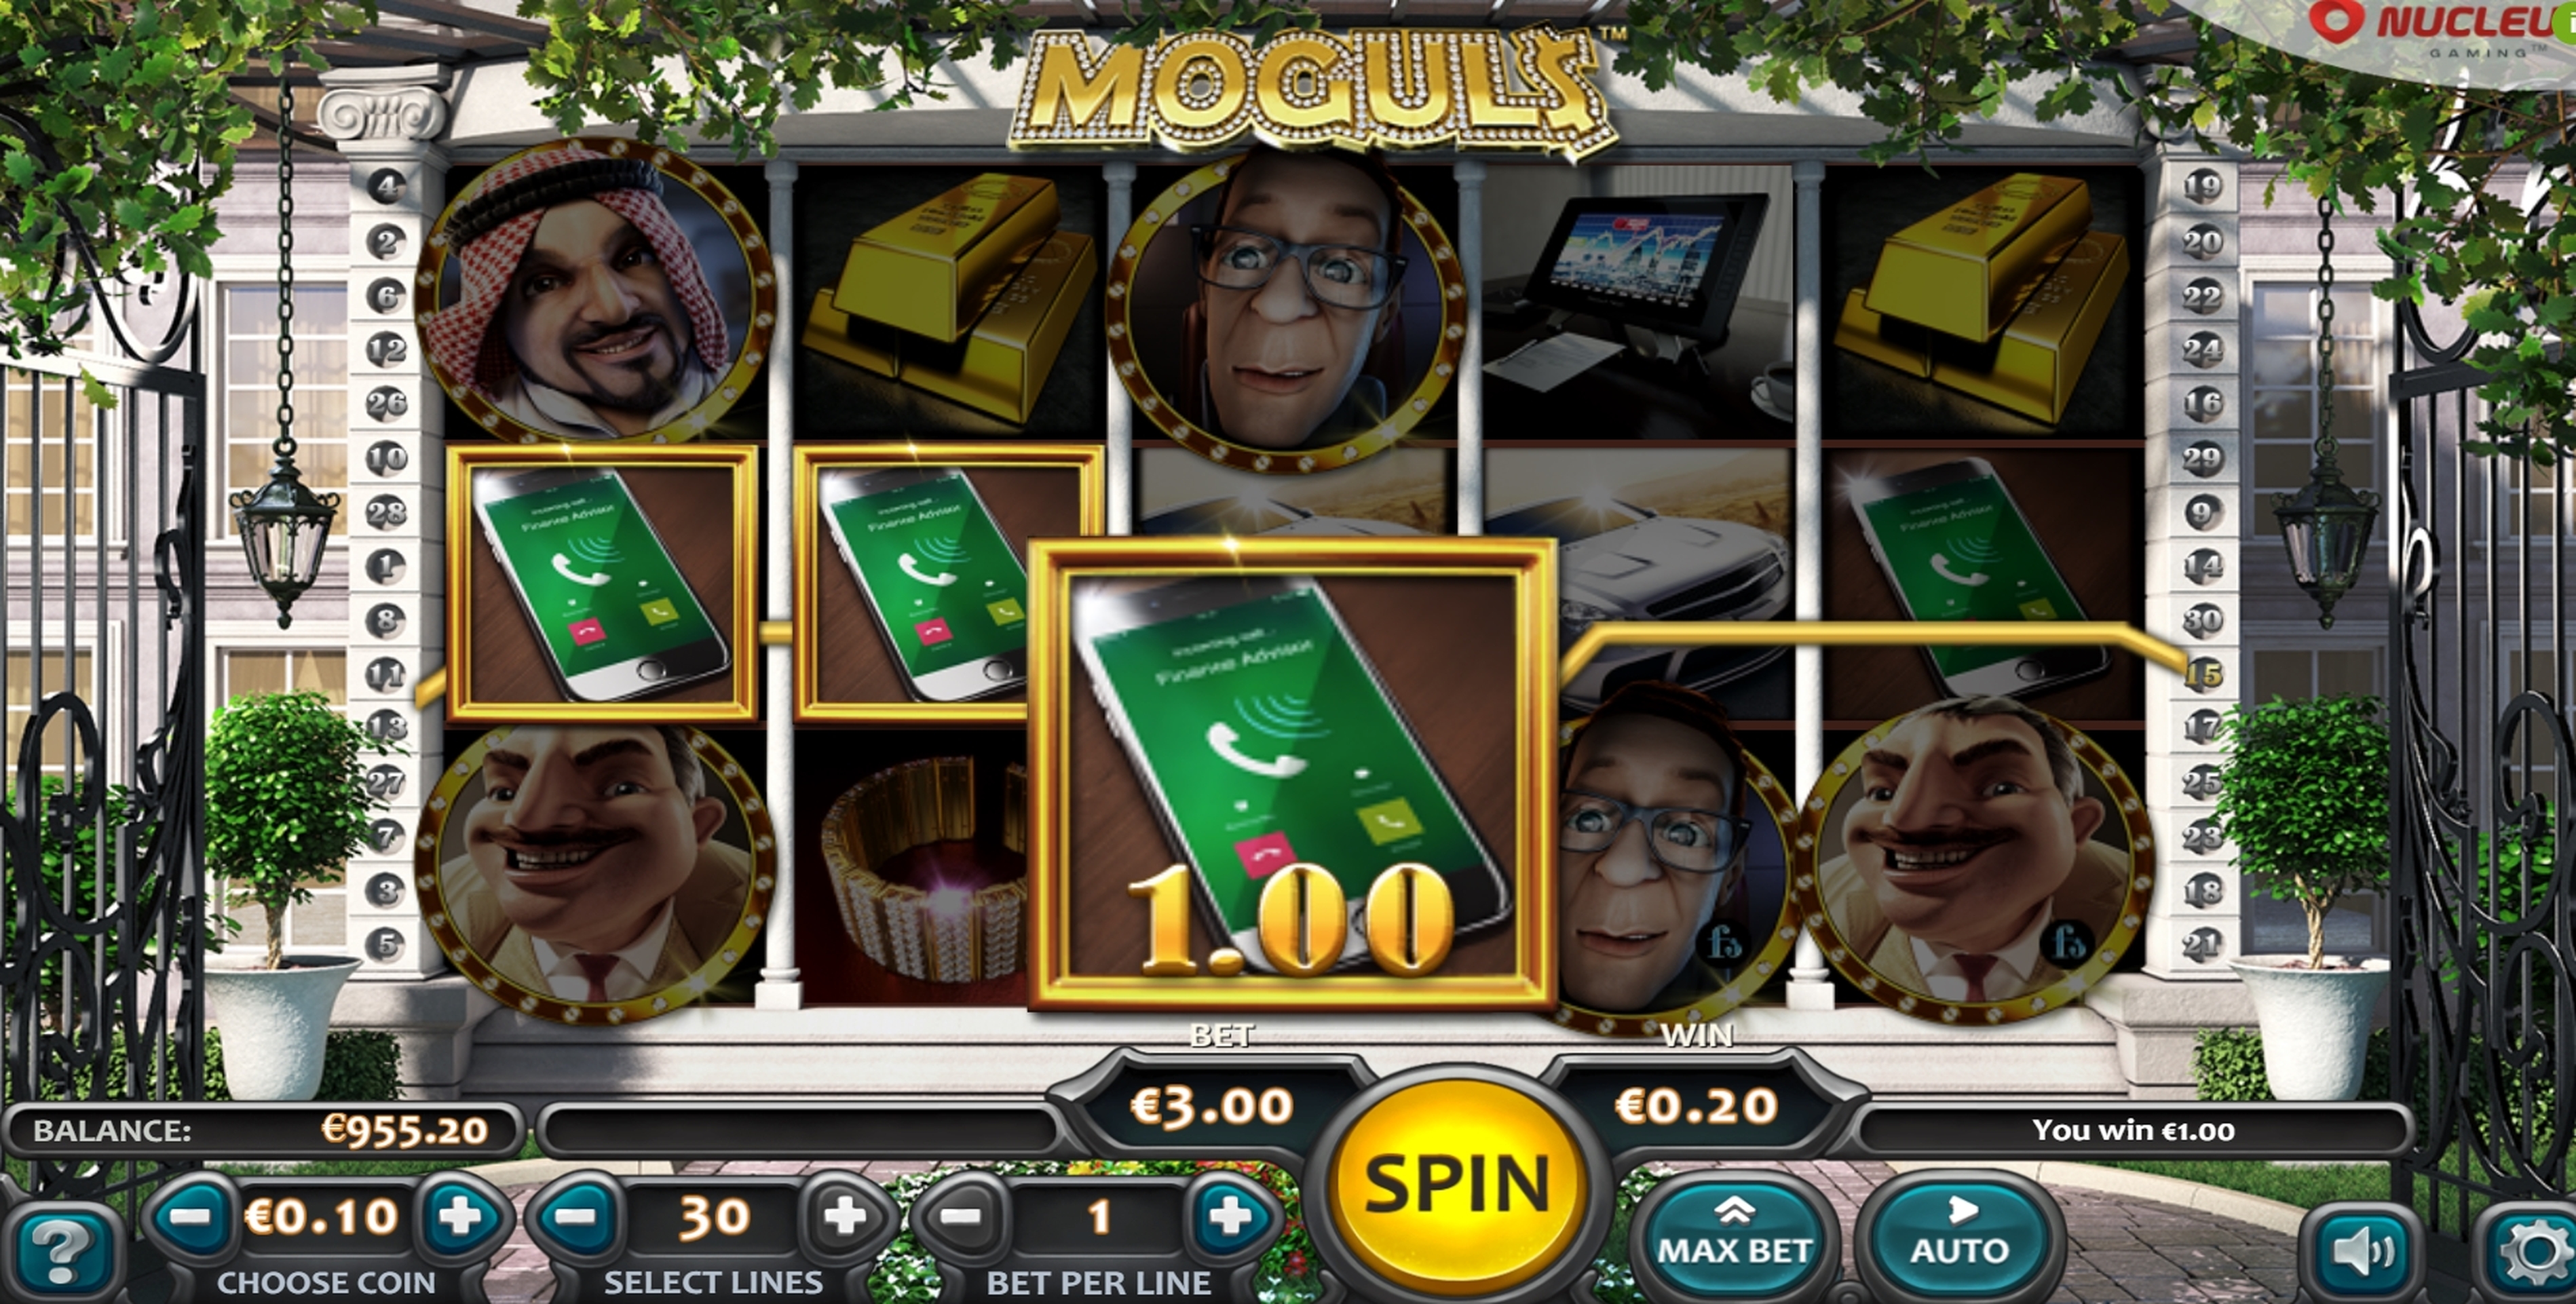 Win Money in The Moguls Free Slot Game by Nucleus Gaming